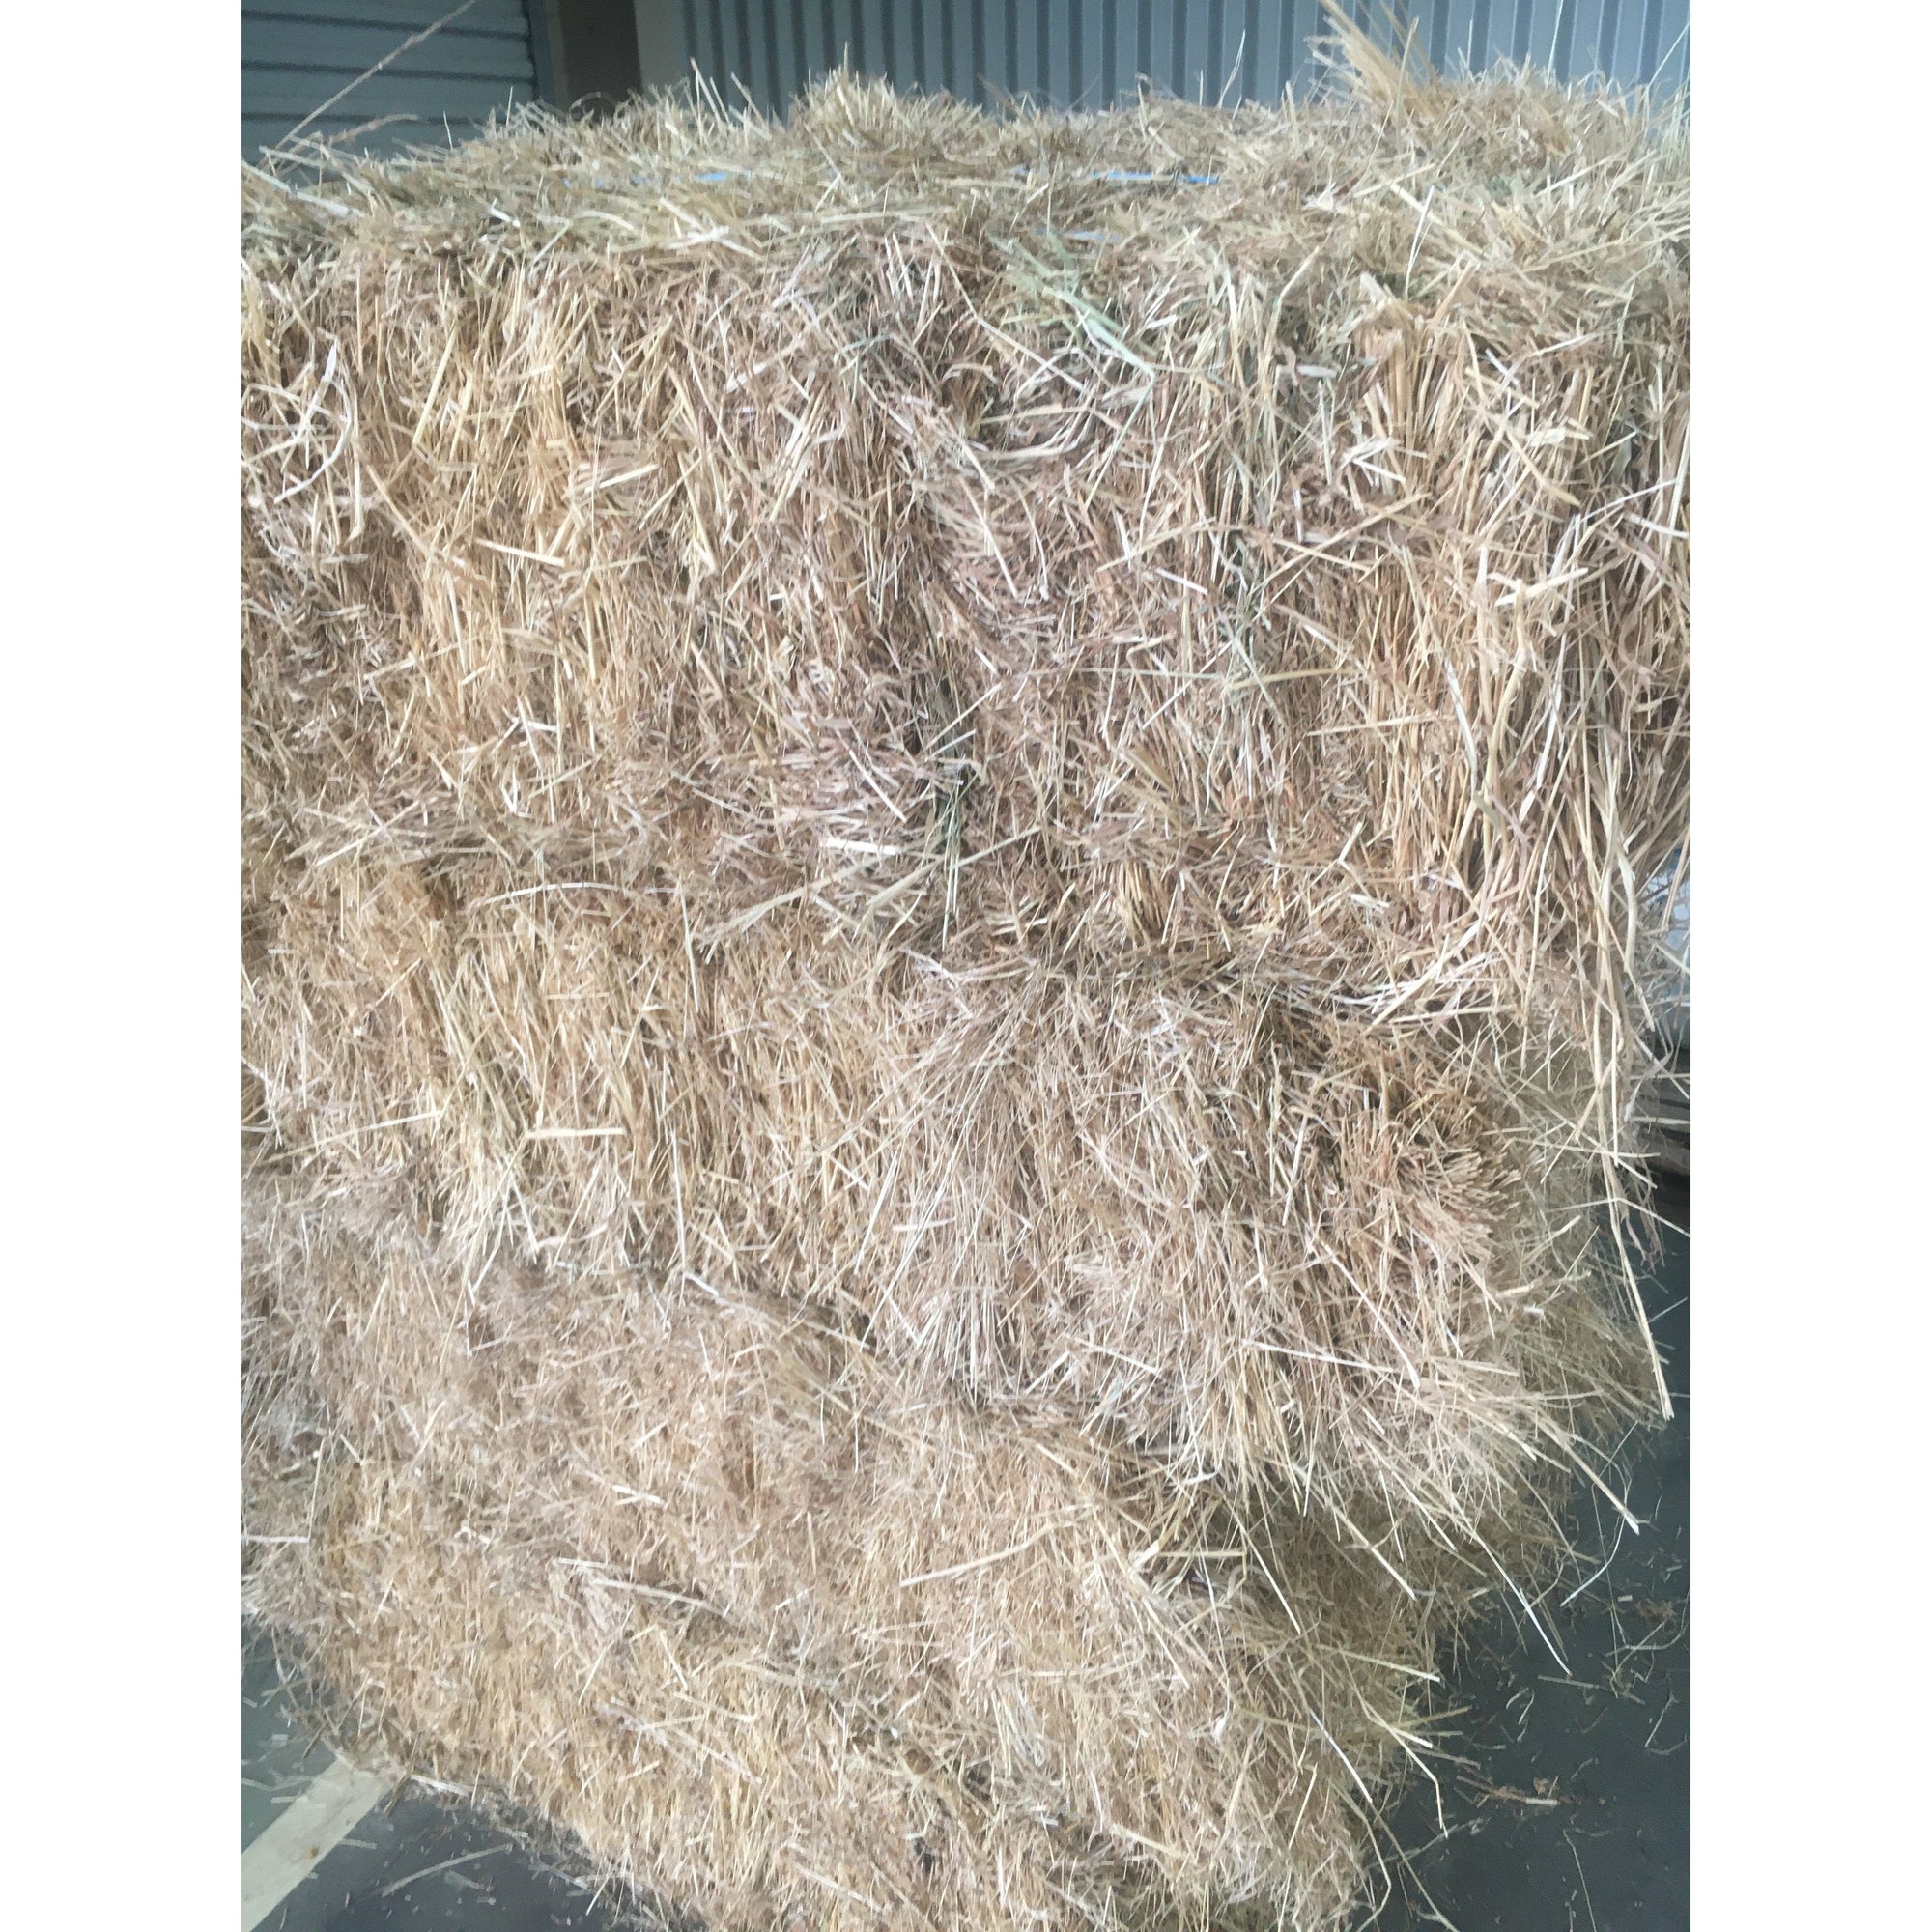 Meadow Hay-Southern Sport Horses-Southern Sport Horses